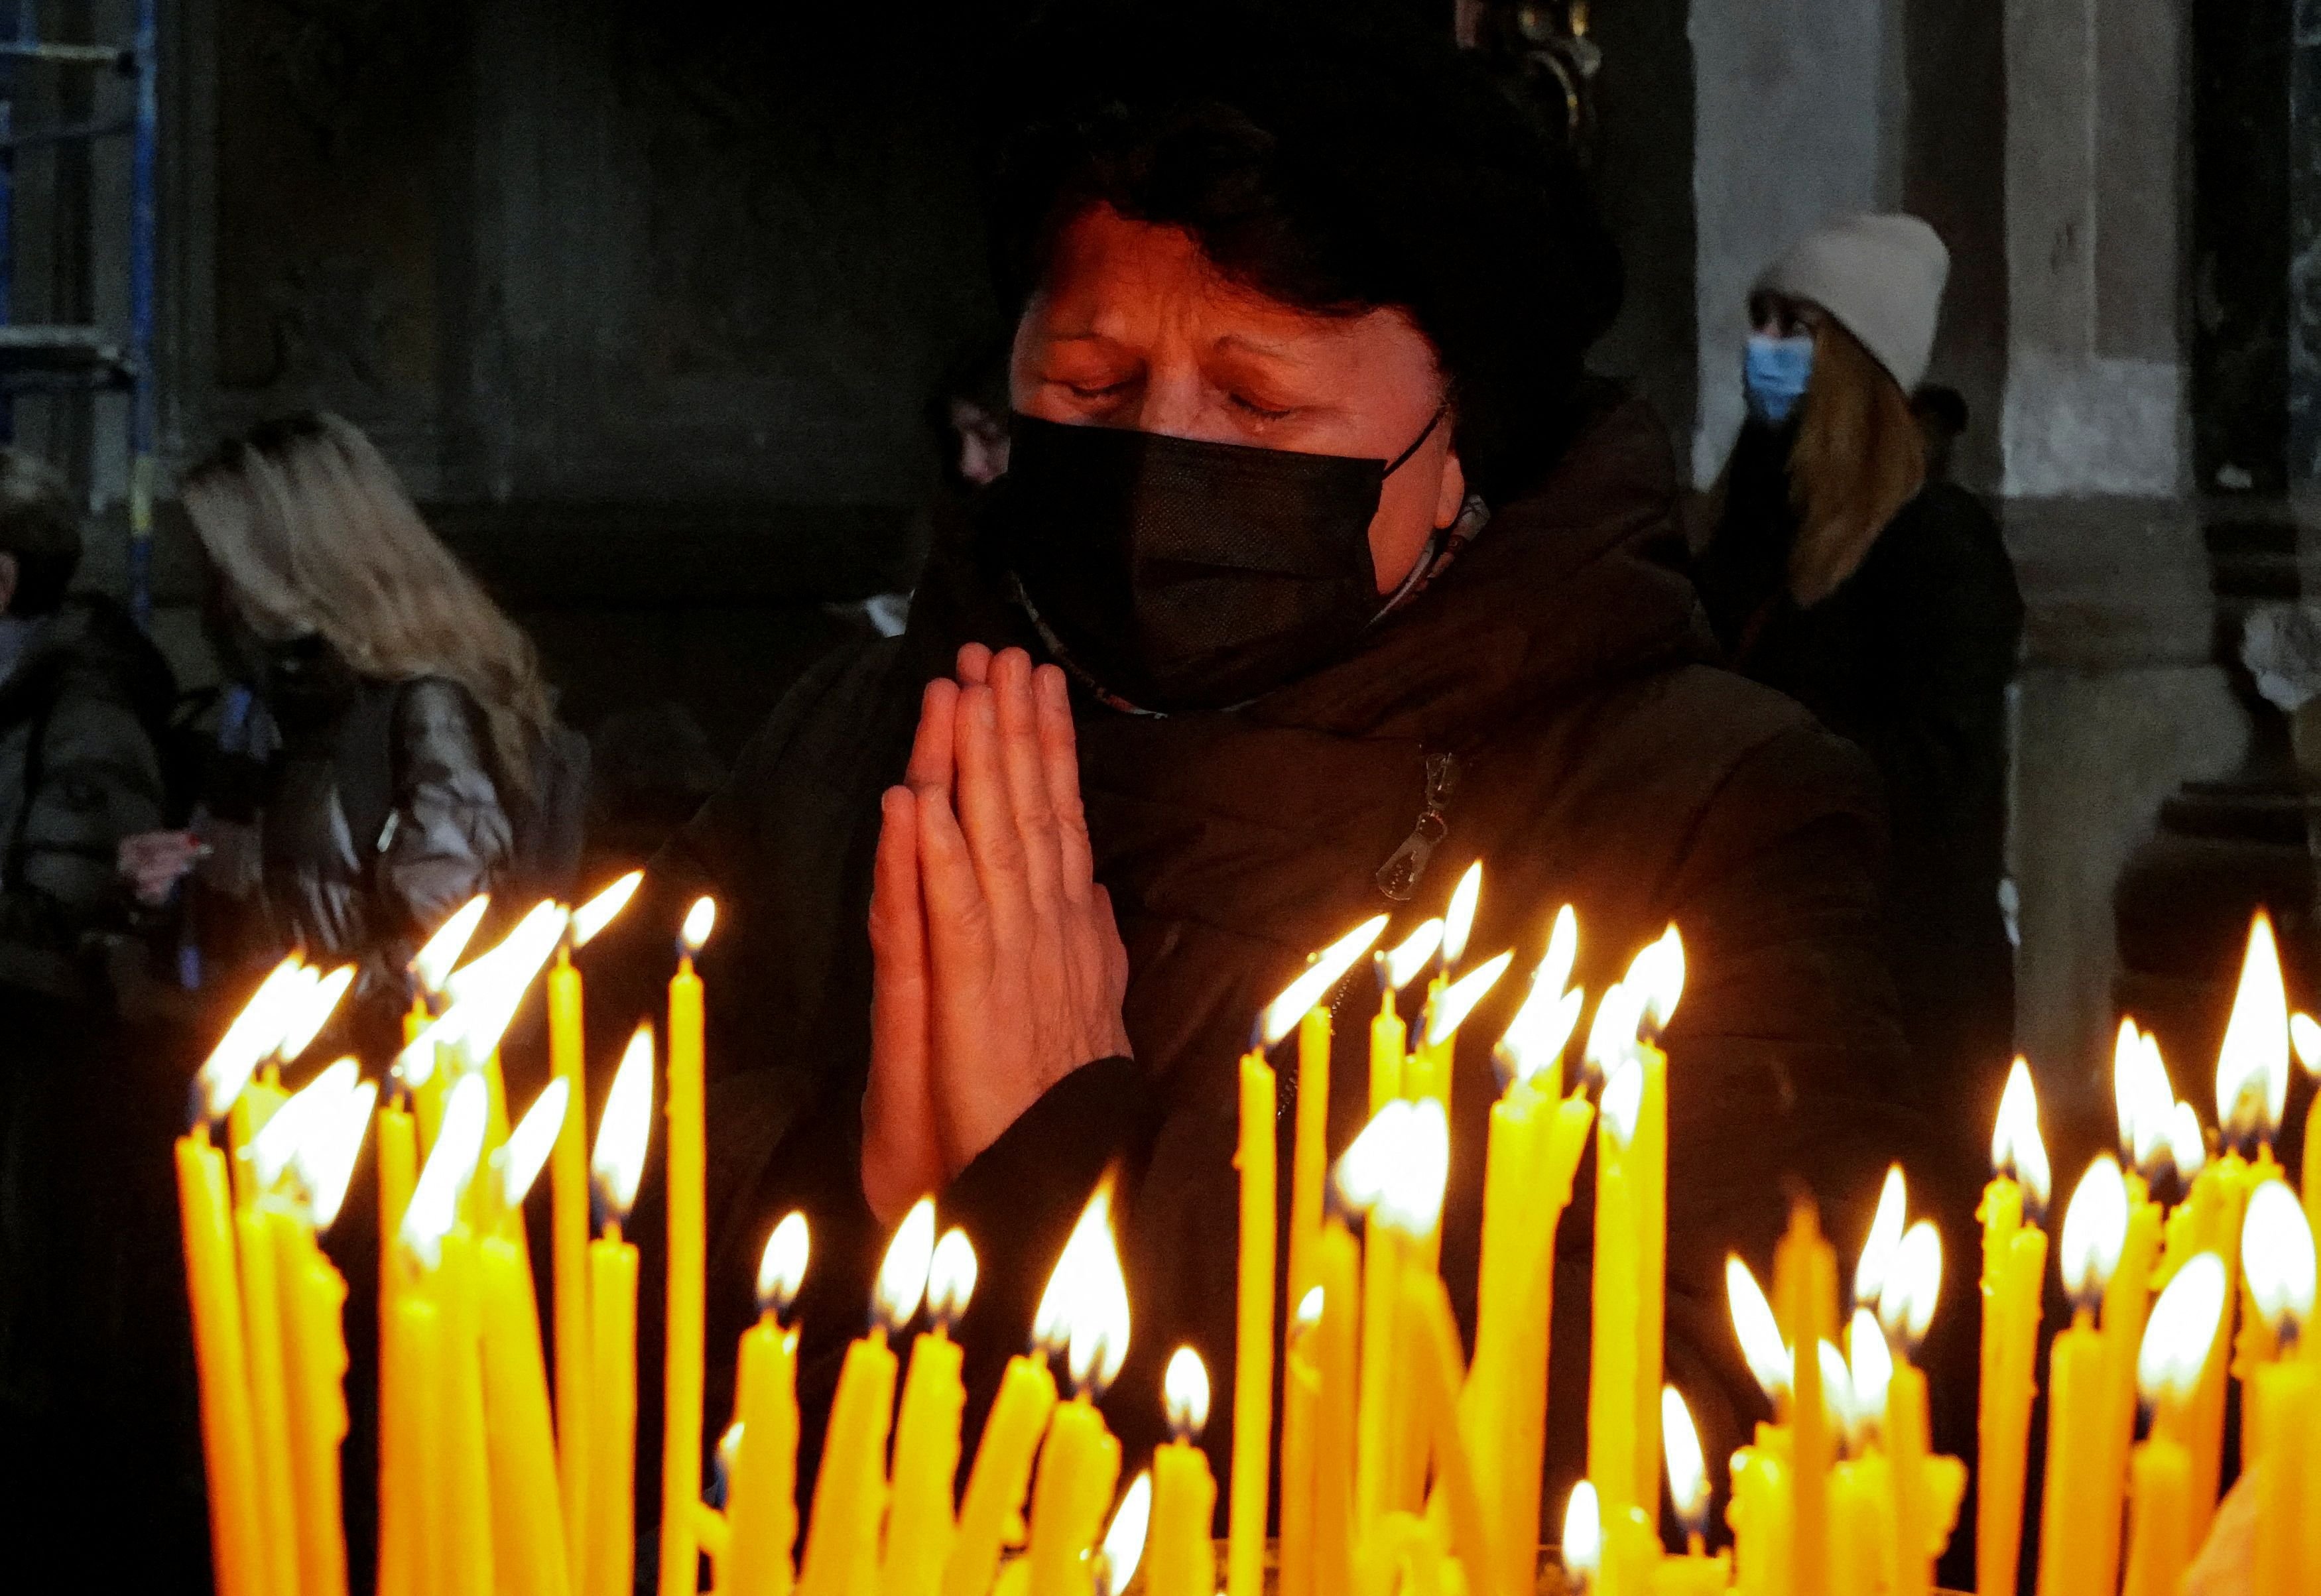 A woman prays at the Catholic Church of the Holy Apostles Peter and Paul in Lviv, Ukraine, March 20, 2022, during Russia's invasion of Ukraine. (CNS photo/Zohra Bensemra, Reuters)